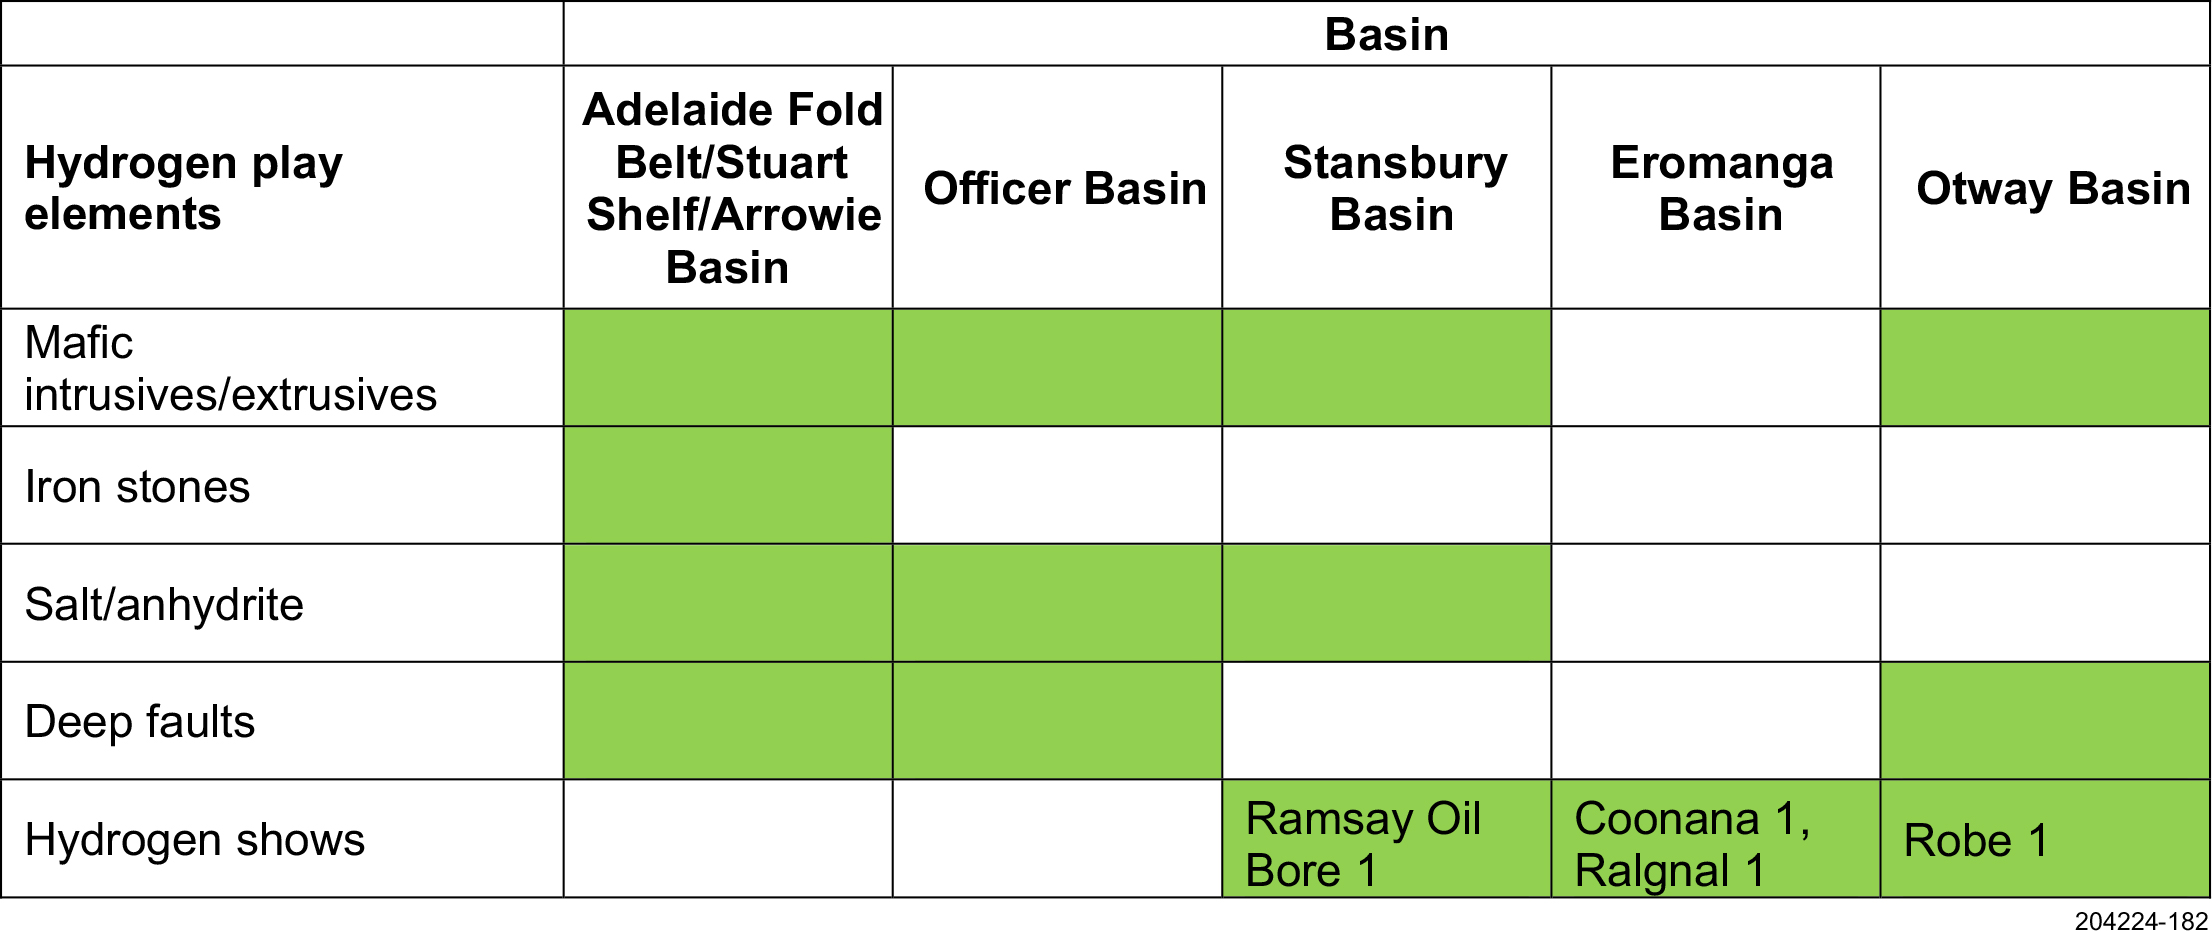 High level screening of SA basins. Stansbury, Eromanga and Otway Basins contain wells with hydrogen shows.